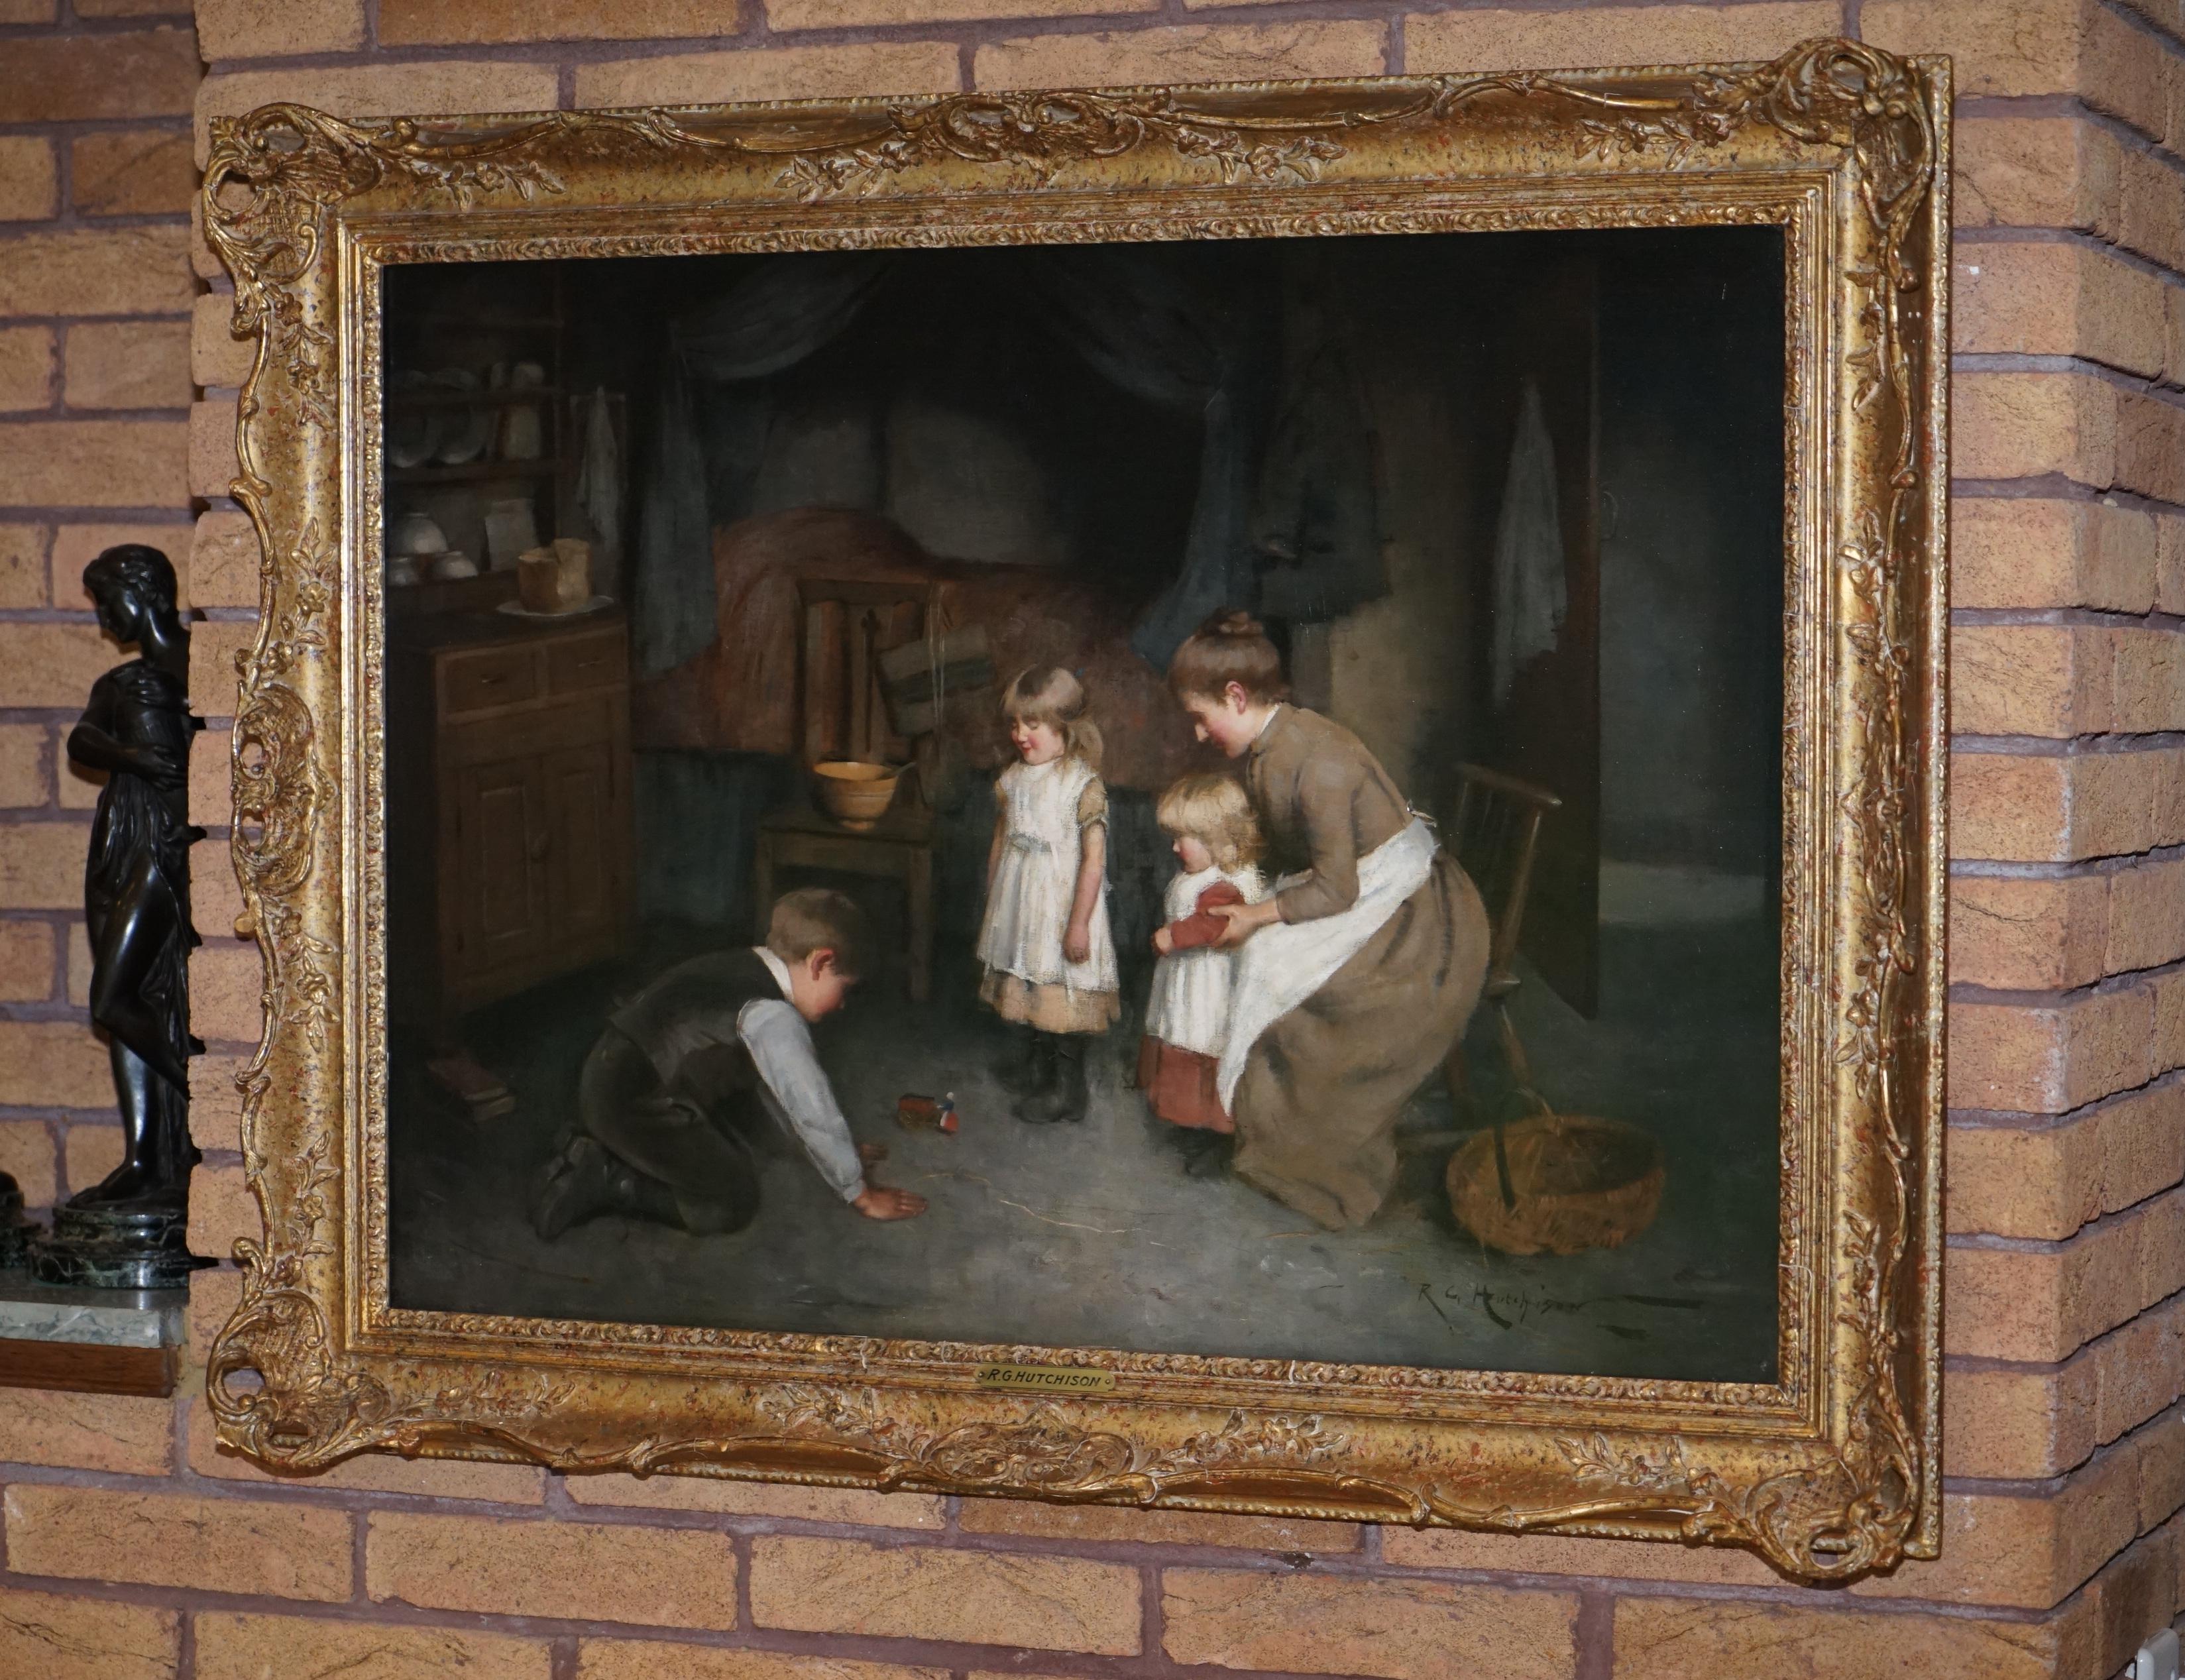 We are delighted to offer for sale this stunning original circa 1880-1890 Robert Gemmell Hutchinson R.S.A oil on canvas titled “A New Toy”

I fell in love with this Gemmell the second I laid eyes on it. There is so much going on, its like a window